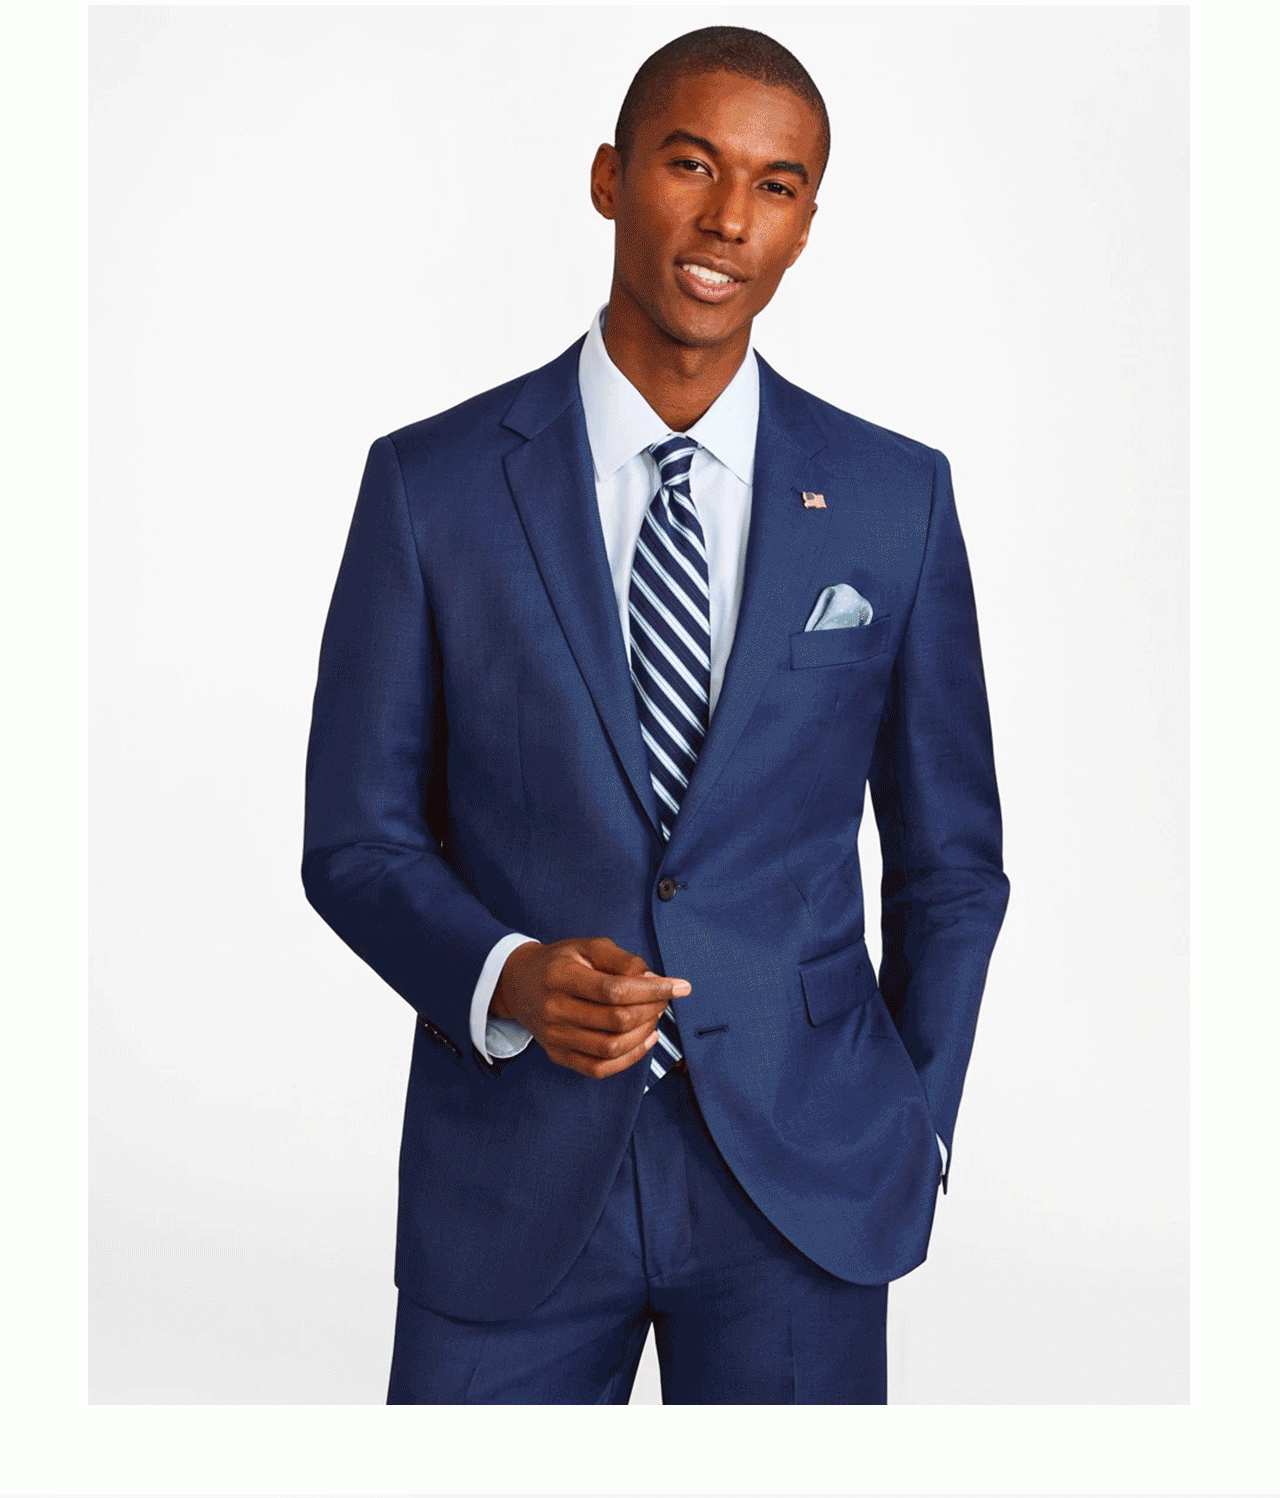 Stay Sharp Our signature 1818 suit collection is made in the USA from the finest Italian fabrics. Now 2 for $1,499 (or up to $1,198 each)